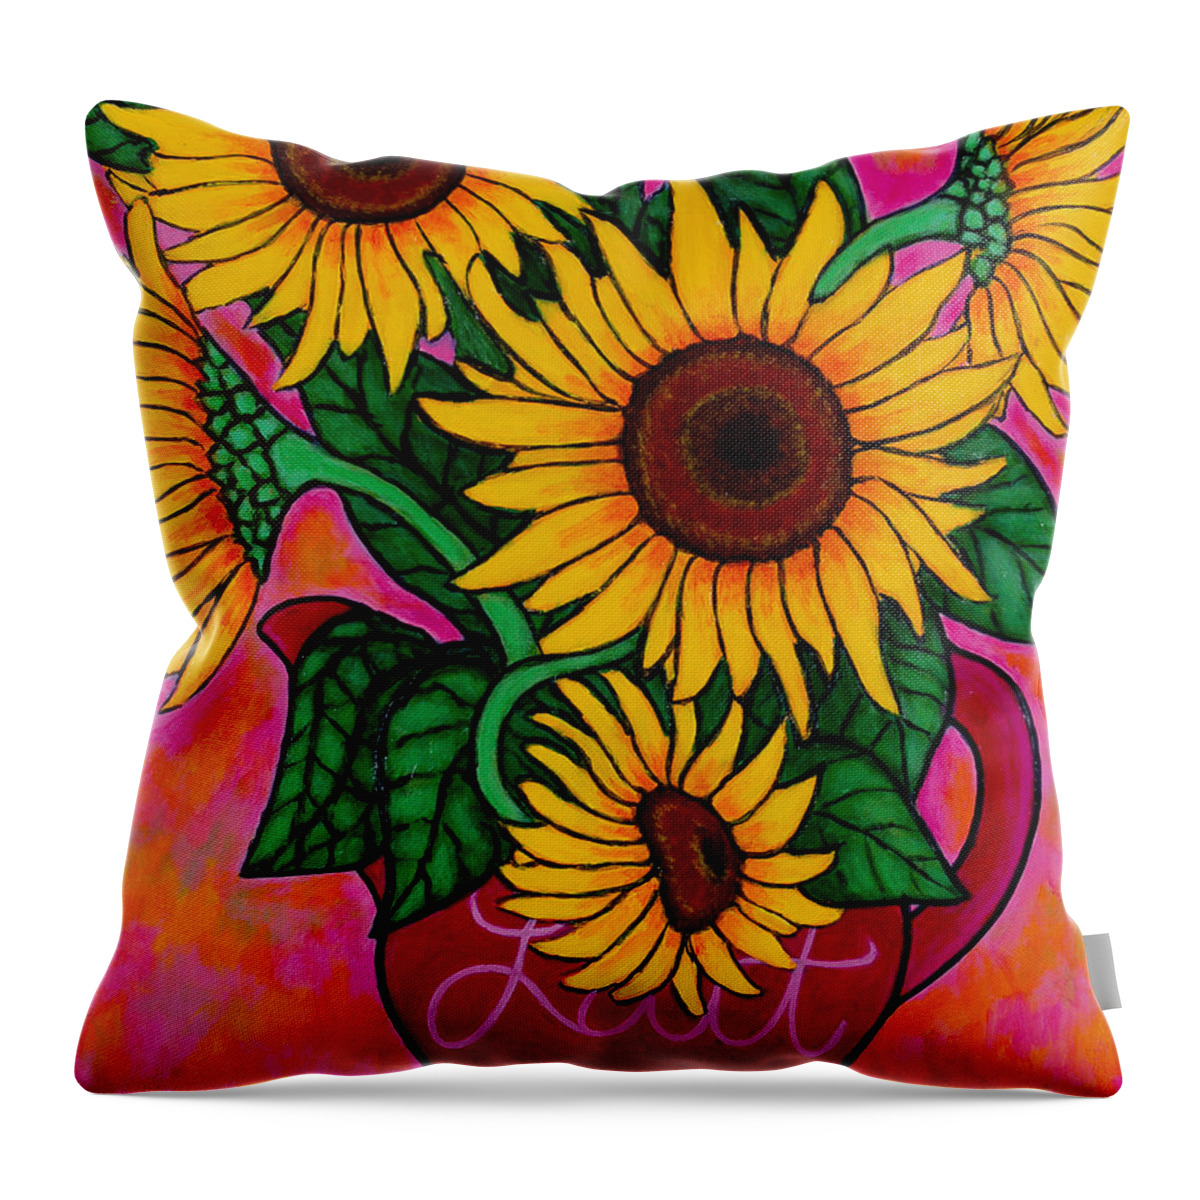 Sunflowers Throw Pillow featuring the painting Saturday Morning Sunflowers by Lisa Lorenz